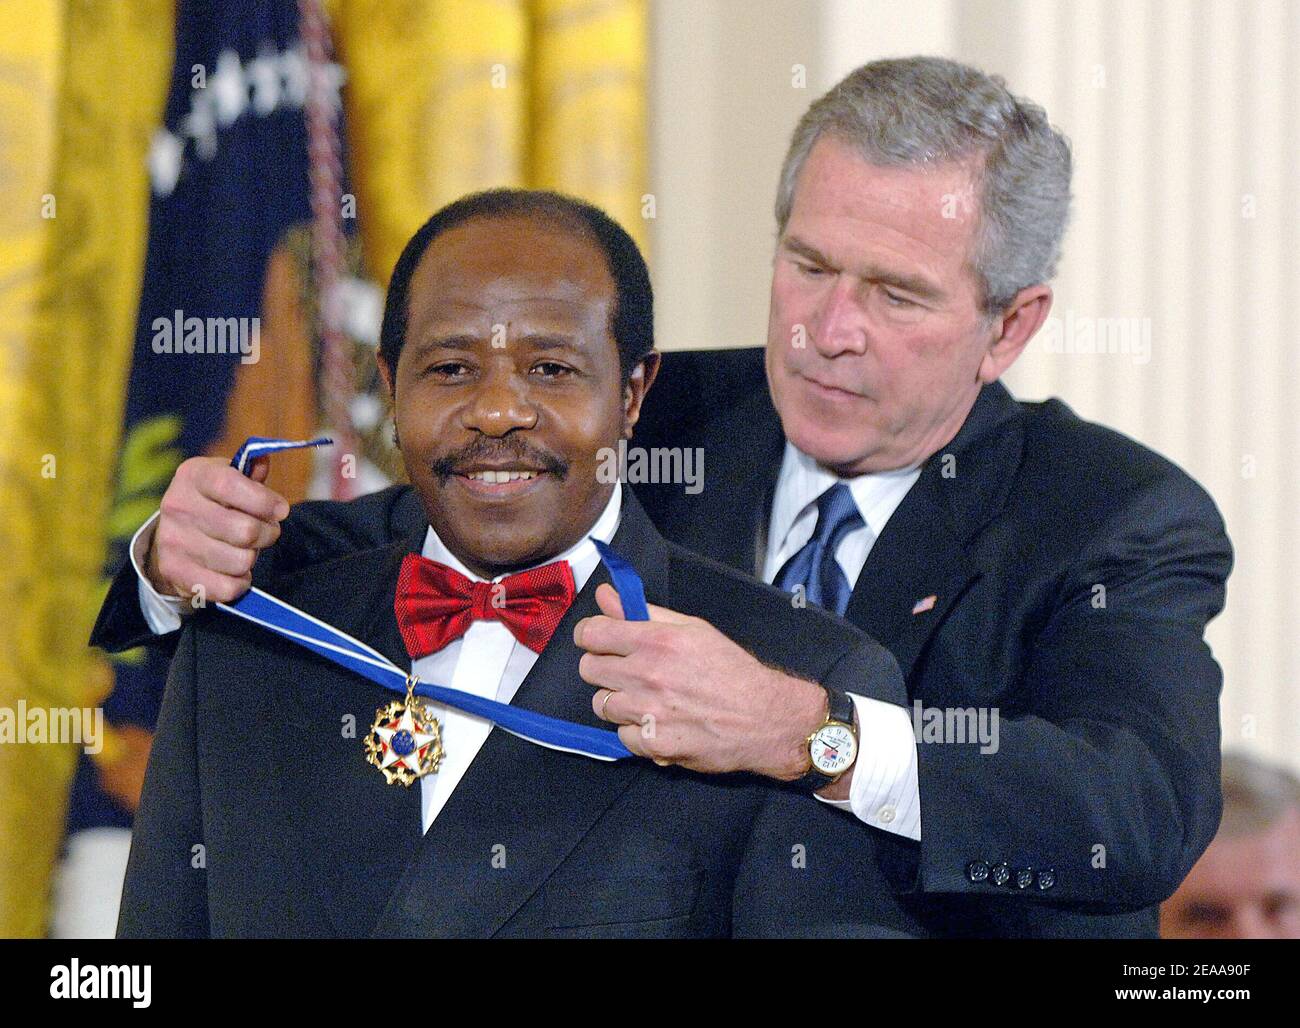 U.S President George W. Bush honors celebrities and personalities including Paul Rusesabagina, who sheltered people at a hotel he managed during the 1994 Rwandan genocide with the Presidential Medal of Freedom during a ceremony at the White House in the East room in Washington, D.C. on November 9, 2005. Photo by Olivier Douliery/ABACAPRESS.COM Stock Photo